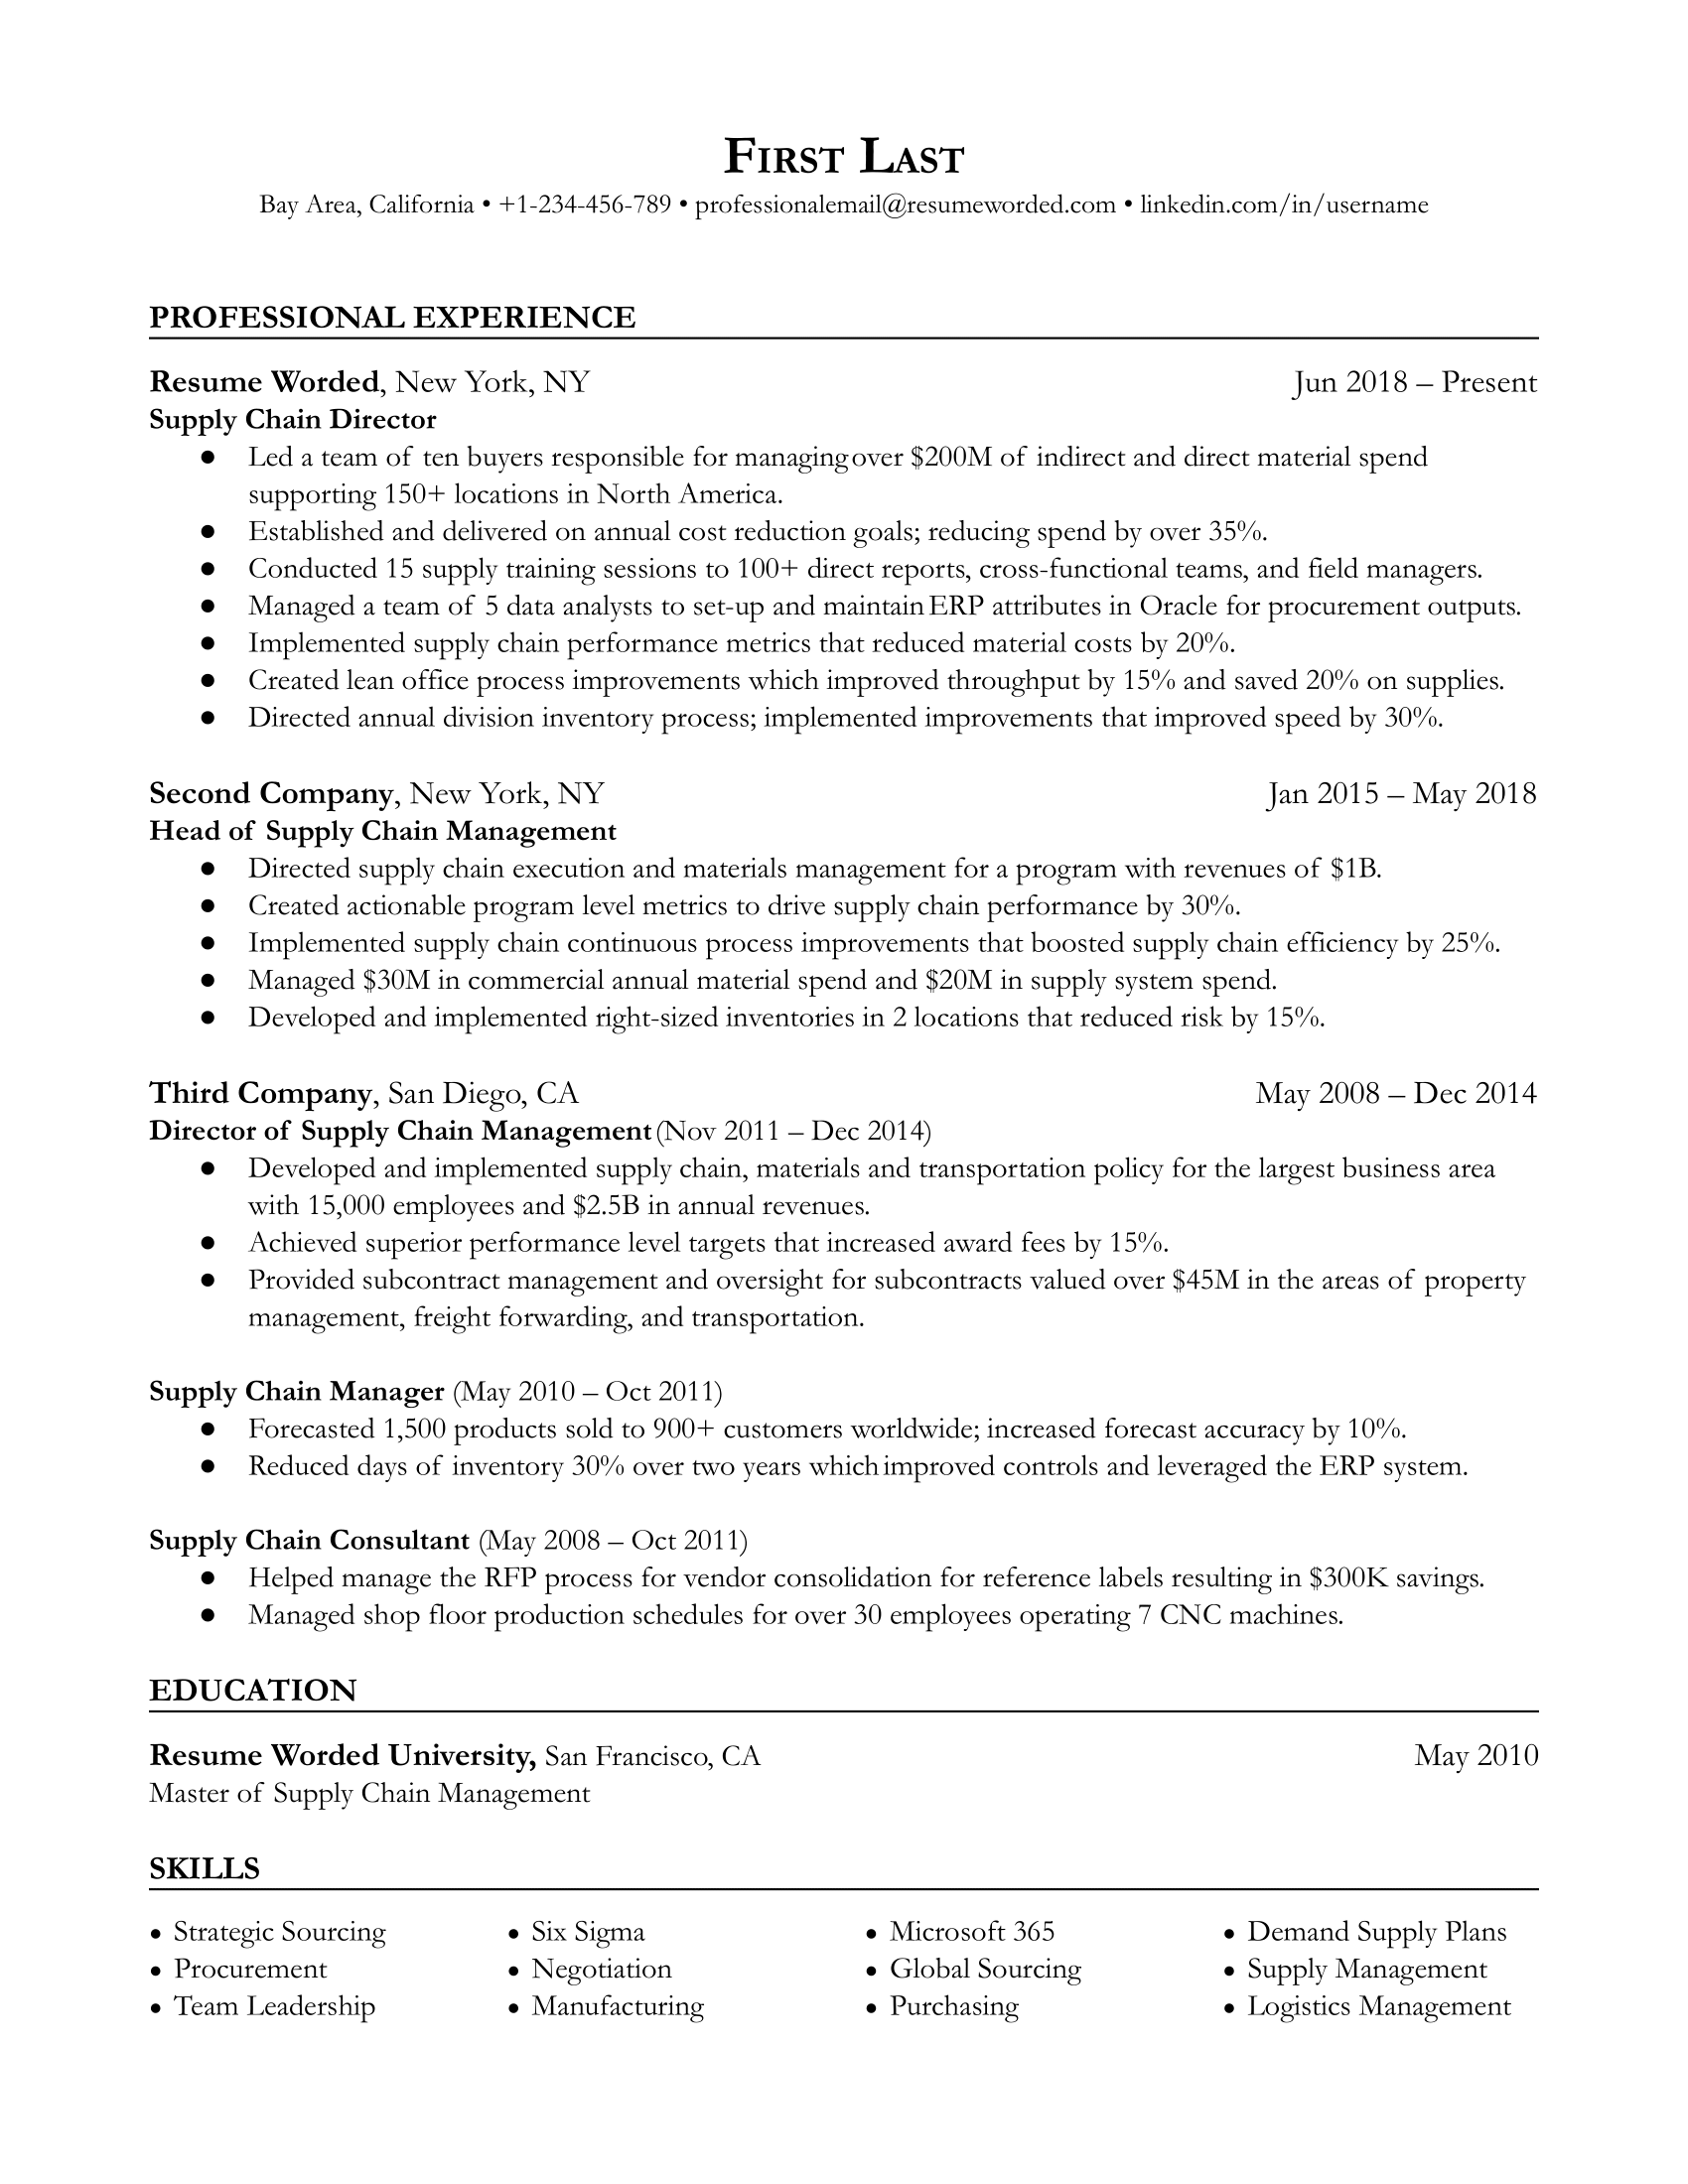 Supply Chain Director Resume Template + Example